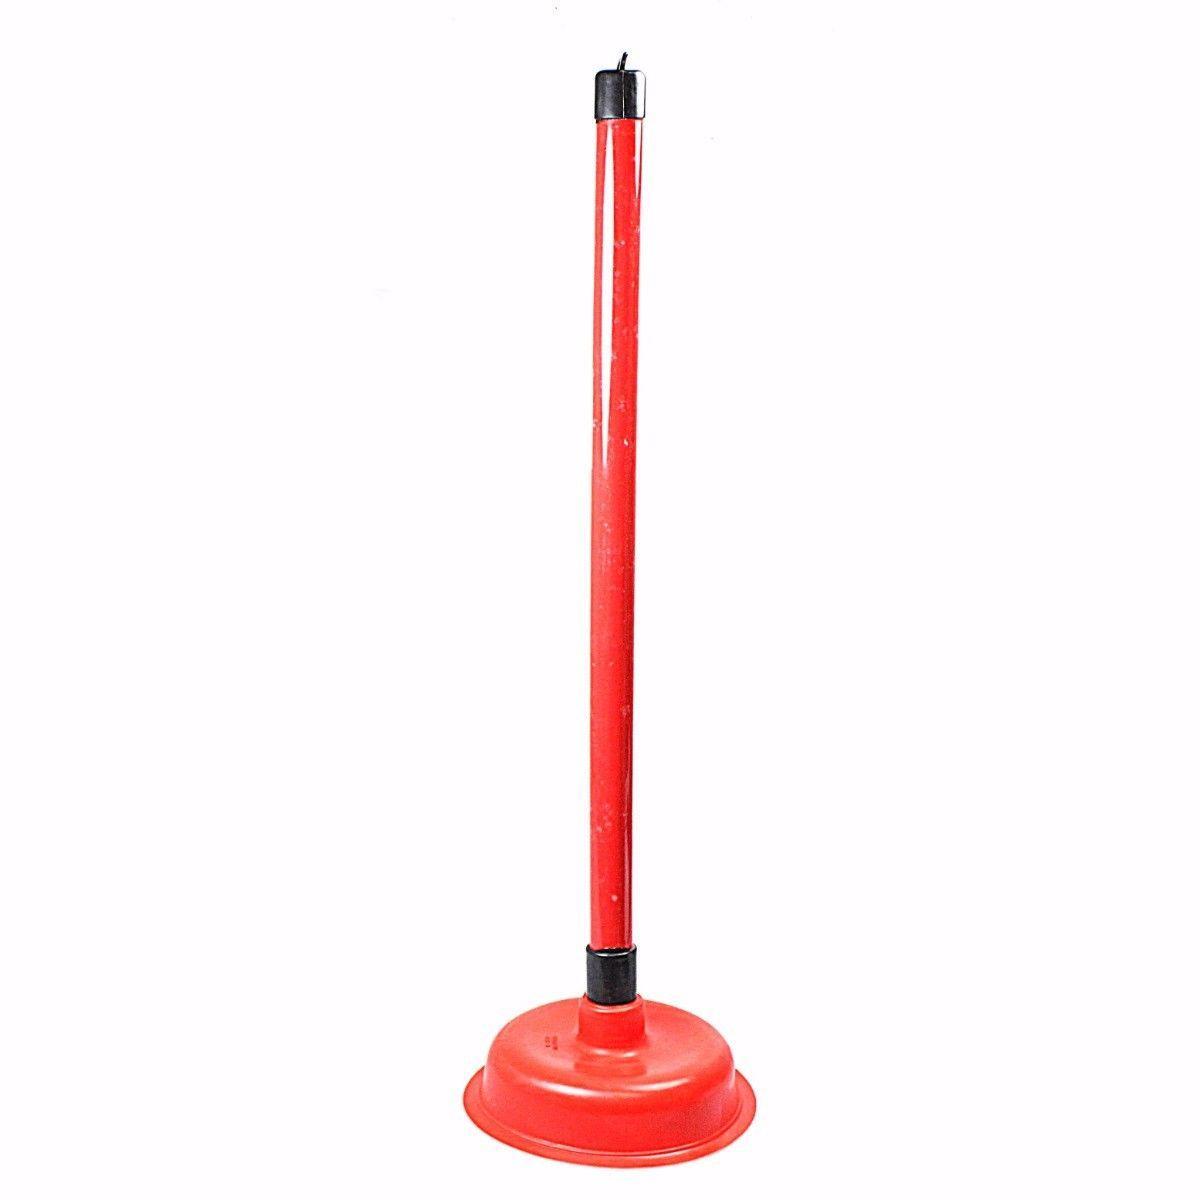 Bathroom Heavy Duty Plunger With Stick In Red  2575 (Parcel Rate)